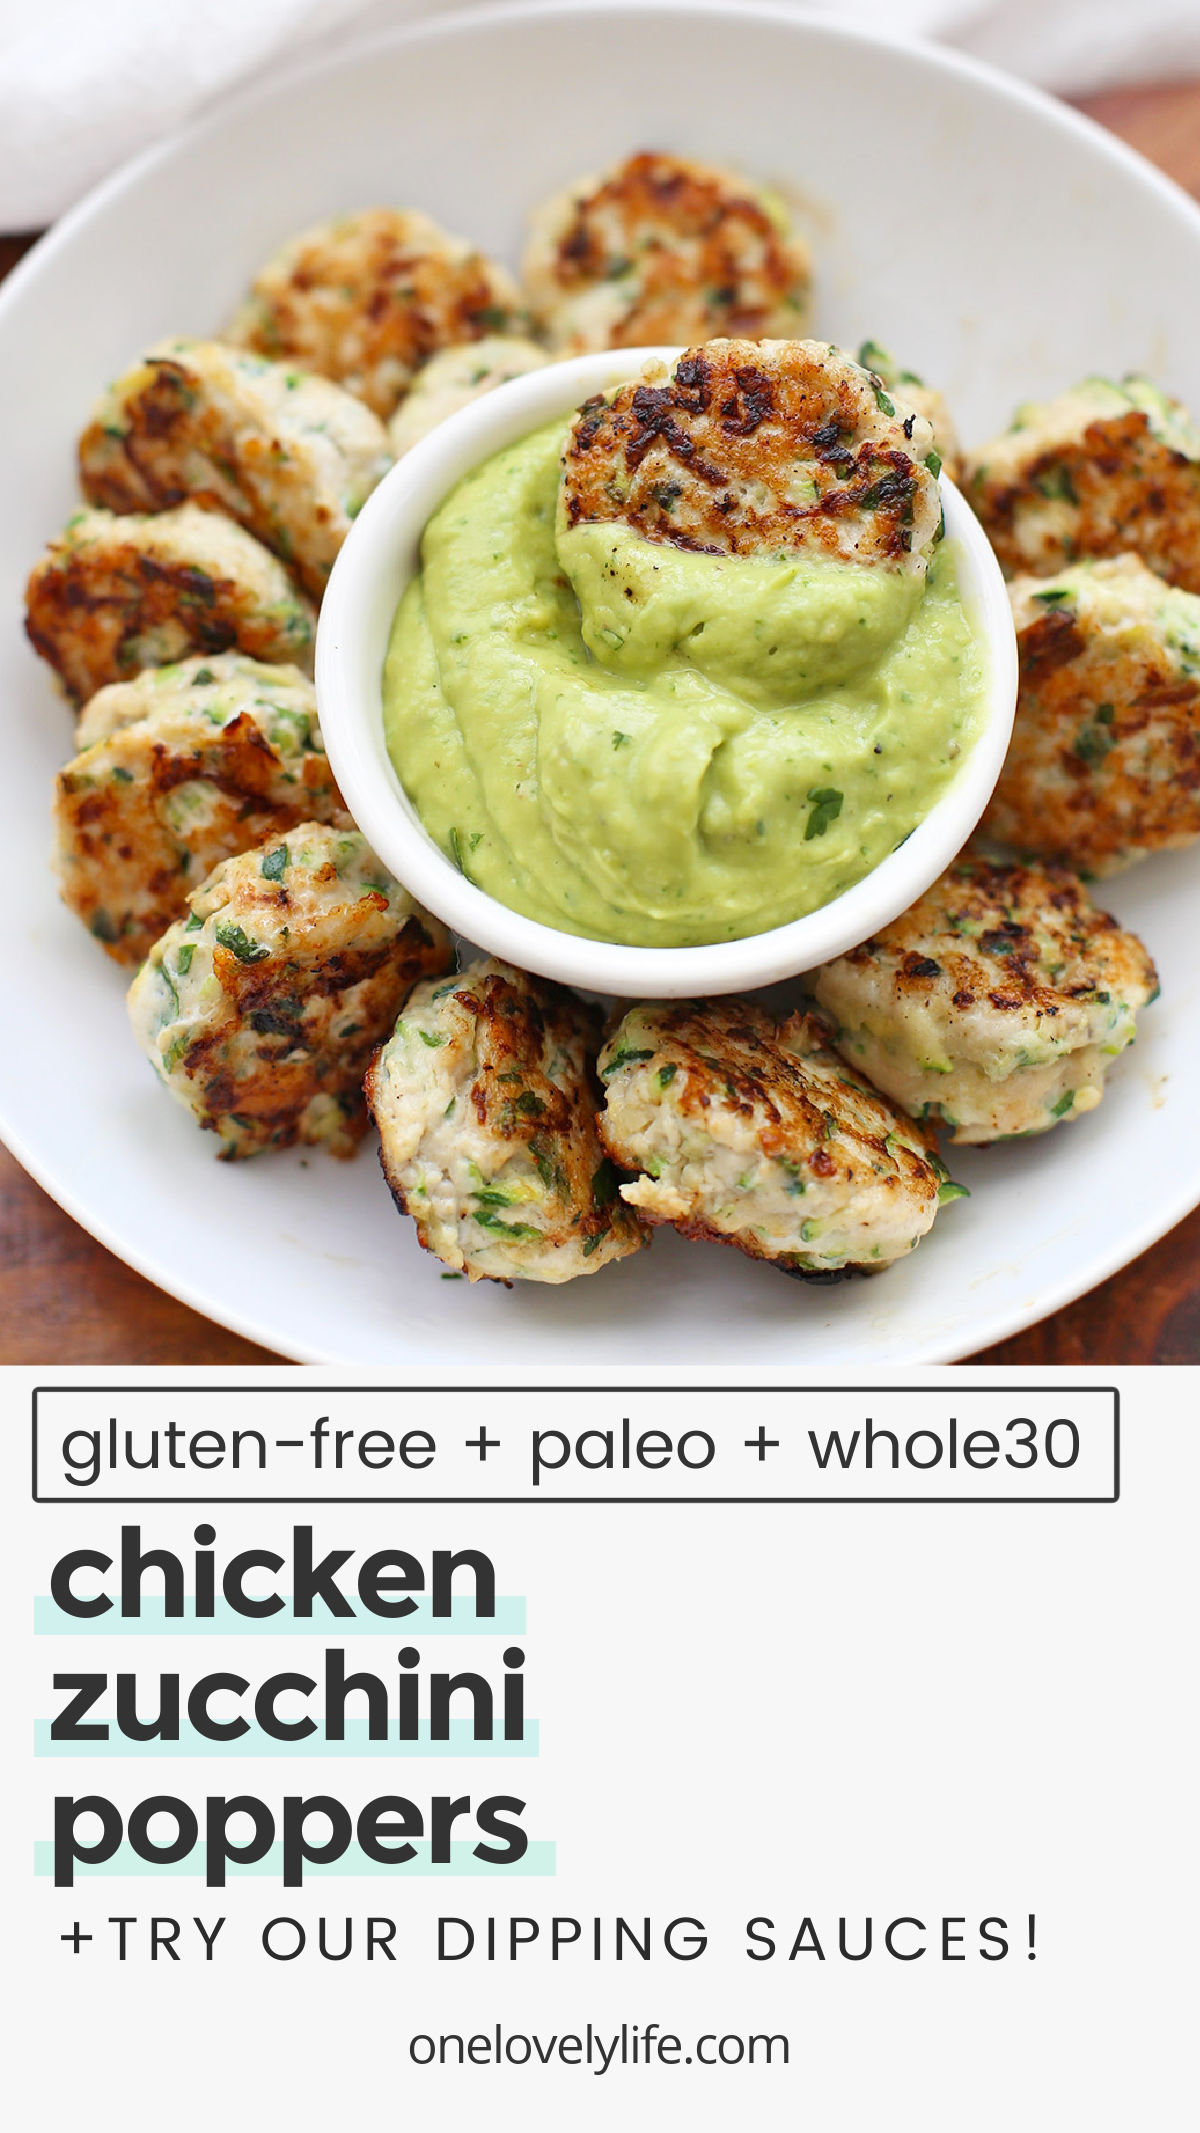 Paleo & Whole30 Chicken Zucchini Poppers - These chicken zucchini meatballs are so easy and delicious! Perfect for meal prep and clean eating! // keto meatballs // paleo meatballs // chicken meatballs // paleo appetizer // paleo meal prep// meal prep lunch // meal prep recipe // Whole30 dinner // keto dinner // low carb dinner // paleo chicken meatballs // whole30 meatballs // healthy dinner recipe